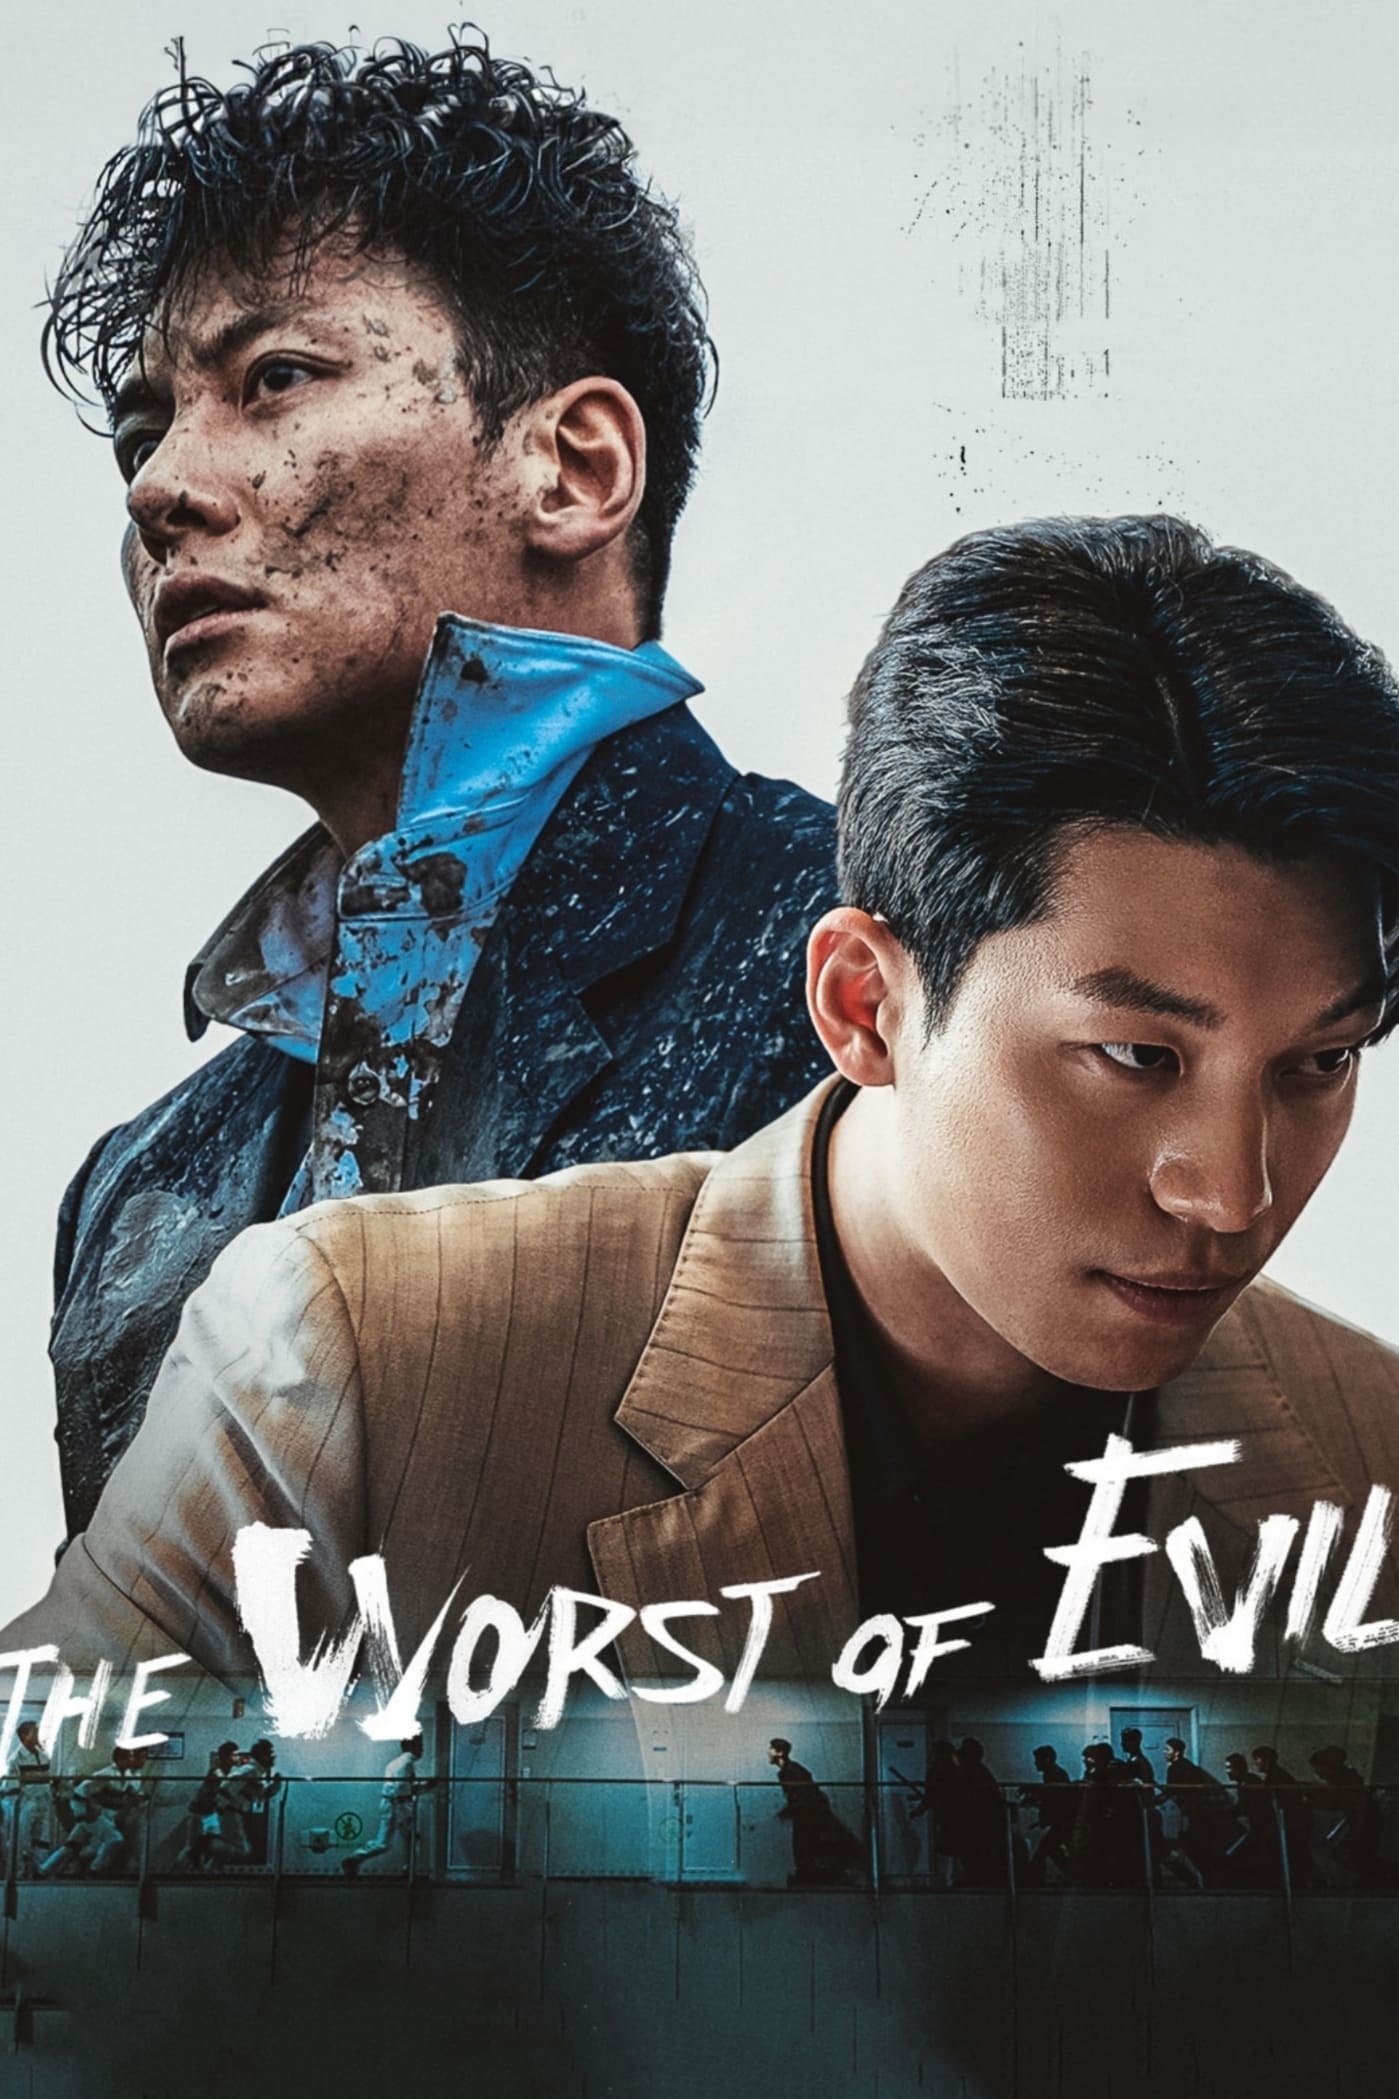 The Worst of Evil - Unspoiled Review